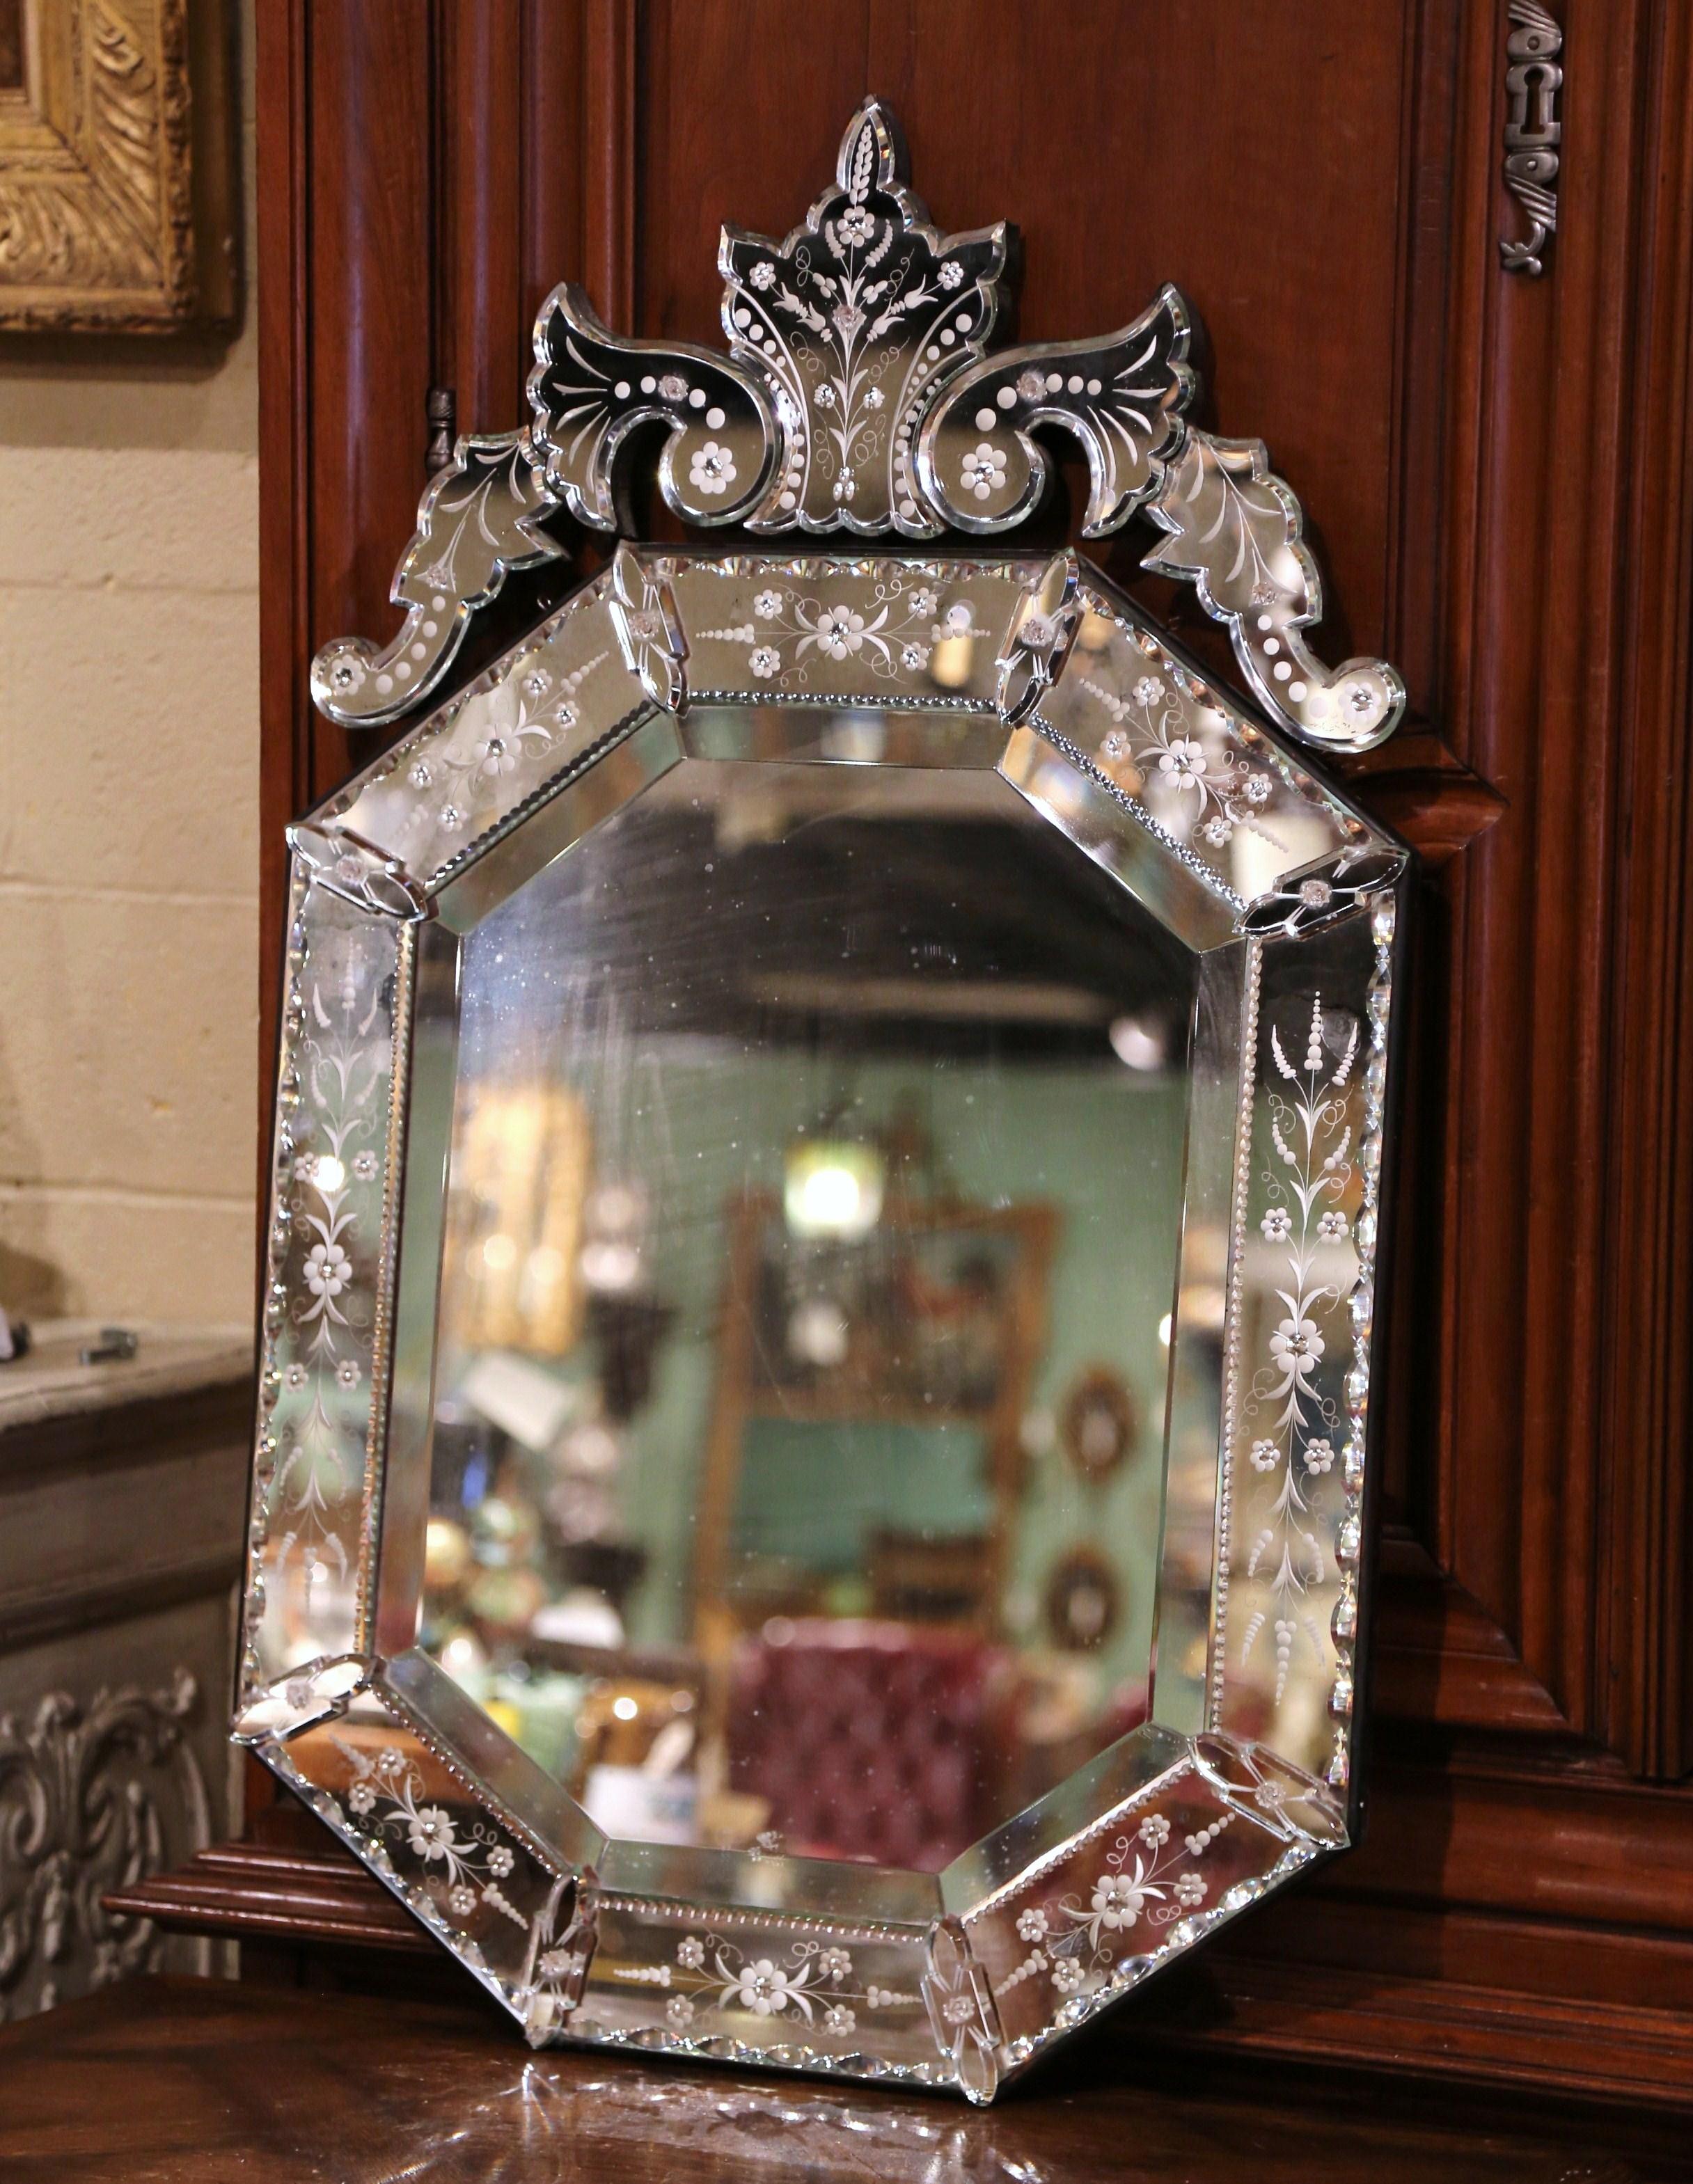 The overlay antique Venetian mirror was crafted in Italy, circa 1900, octagonal in shape, the wall piece features a large carved leaf motif at the pediment, flanked by foliage on both sides. Around the periphery, each small mirror with raised